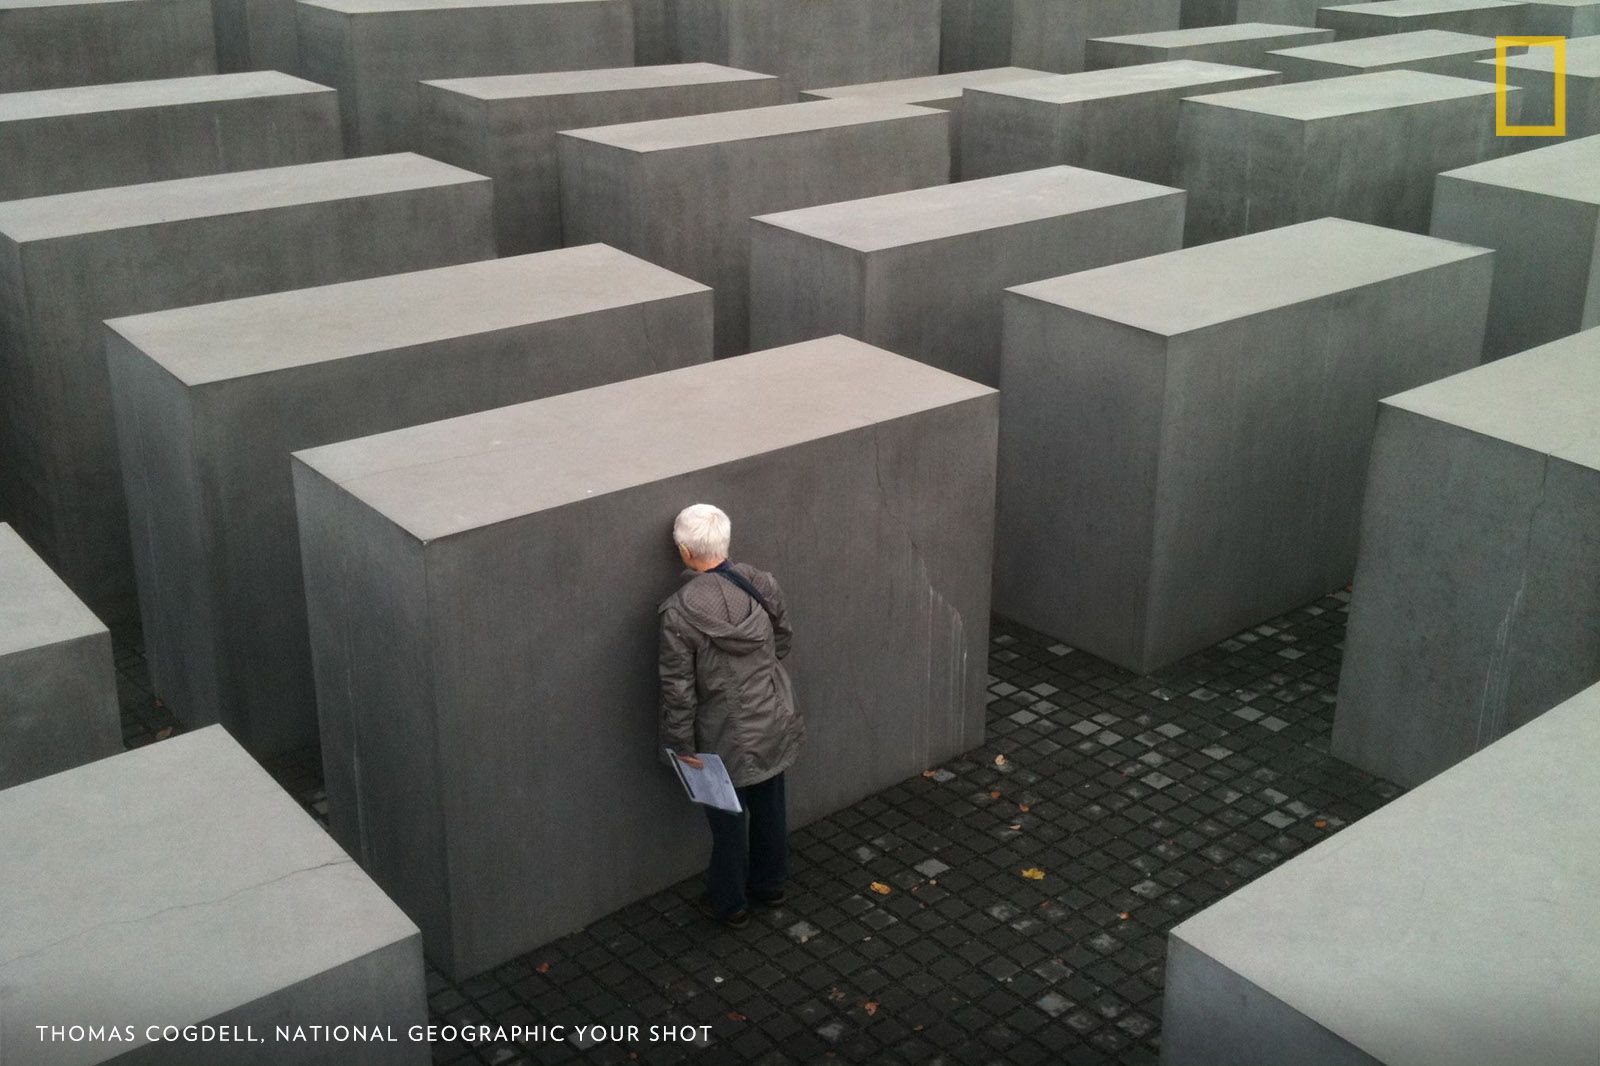 My good friend Hanna Miley is a survivor of the Holocaust. writes Your Shot photographer. She has done extensive research into her parents’ life and death, and [has] written an amazing book called ‘A Garland for Ashes,’ which shares the process of forgiveness and reconciliation. This is Hanna at the Holocaust Memorial in Berlin, having just emerged from the underground museum, where she had once again to choose hope in the face of remembered horror. Image by Thomas Cogdell, National Geographic Your Shot.